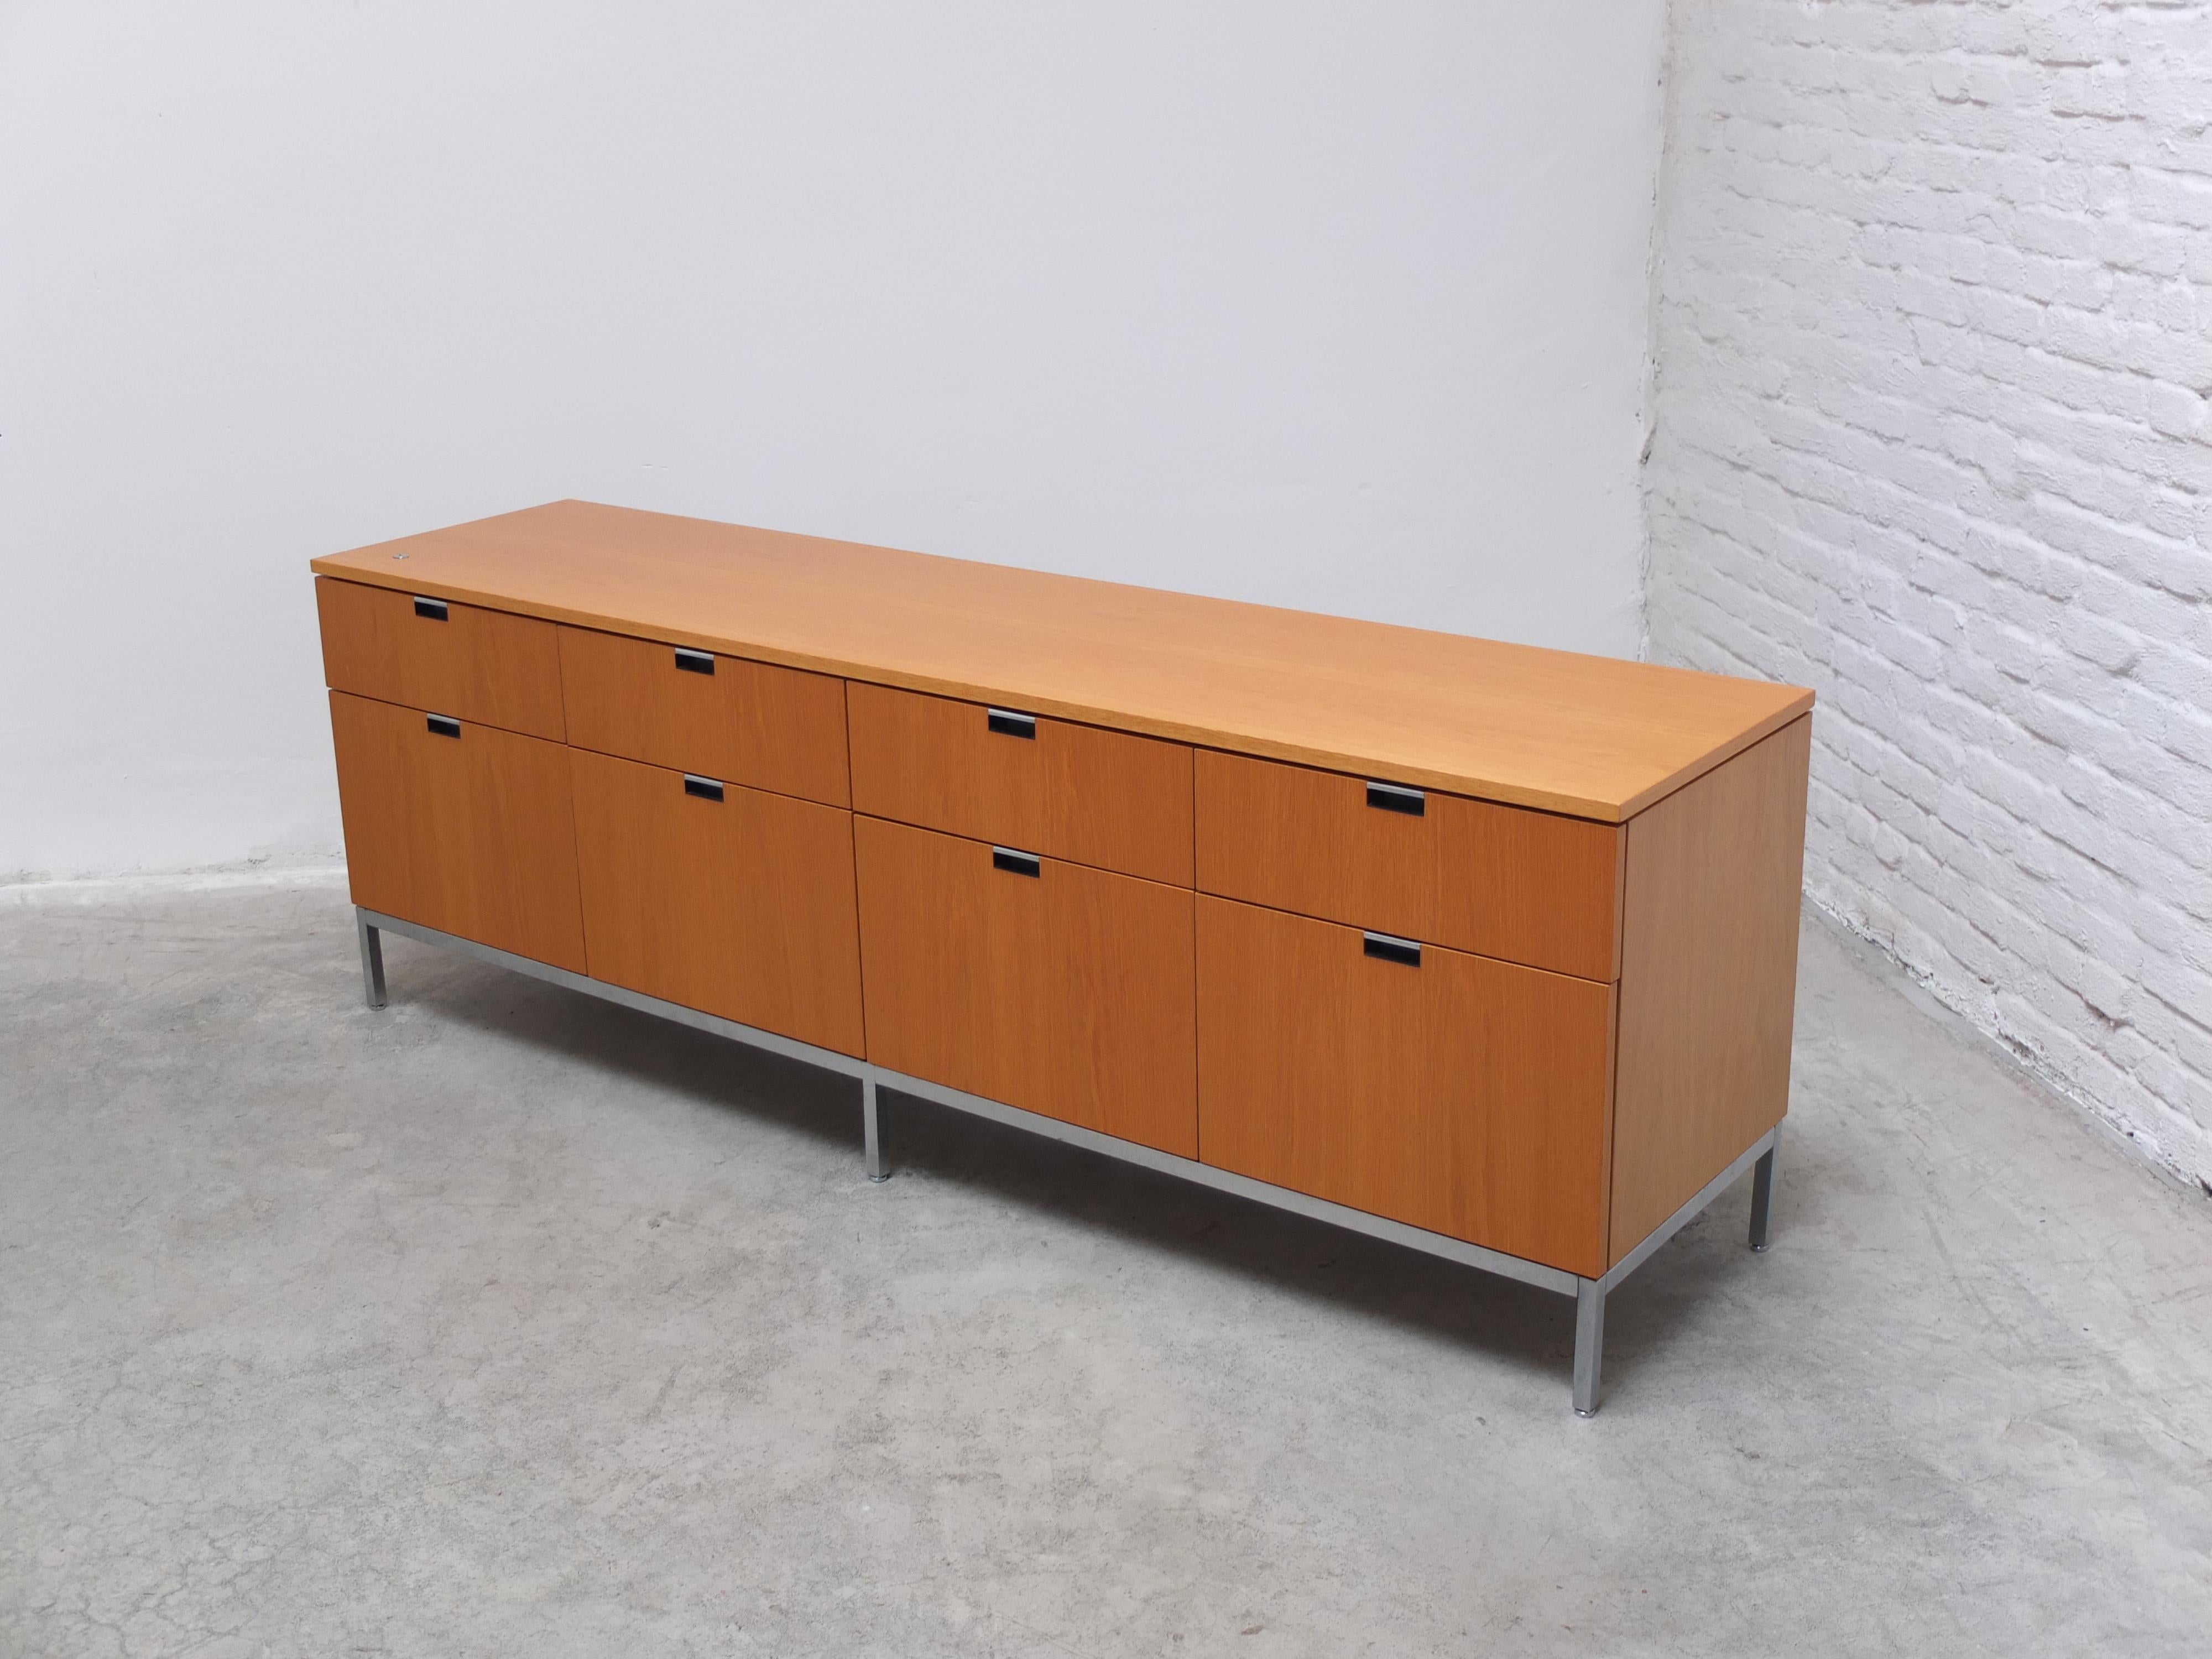 American Freestanding 8-Drawer Credenza by Florence Knoll for Knoll, 1961 For Sale